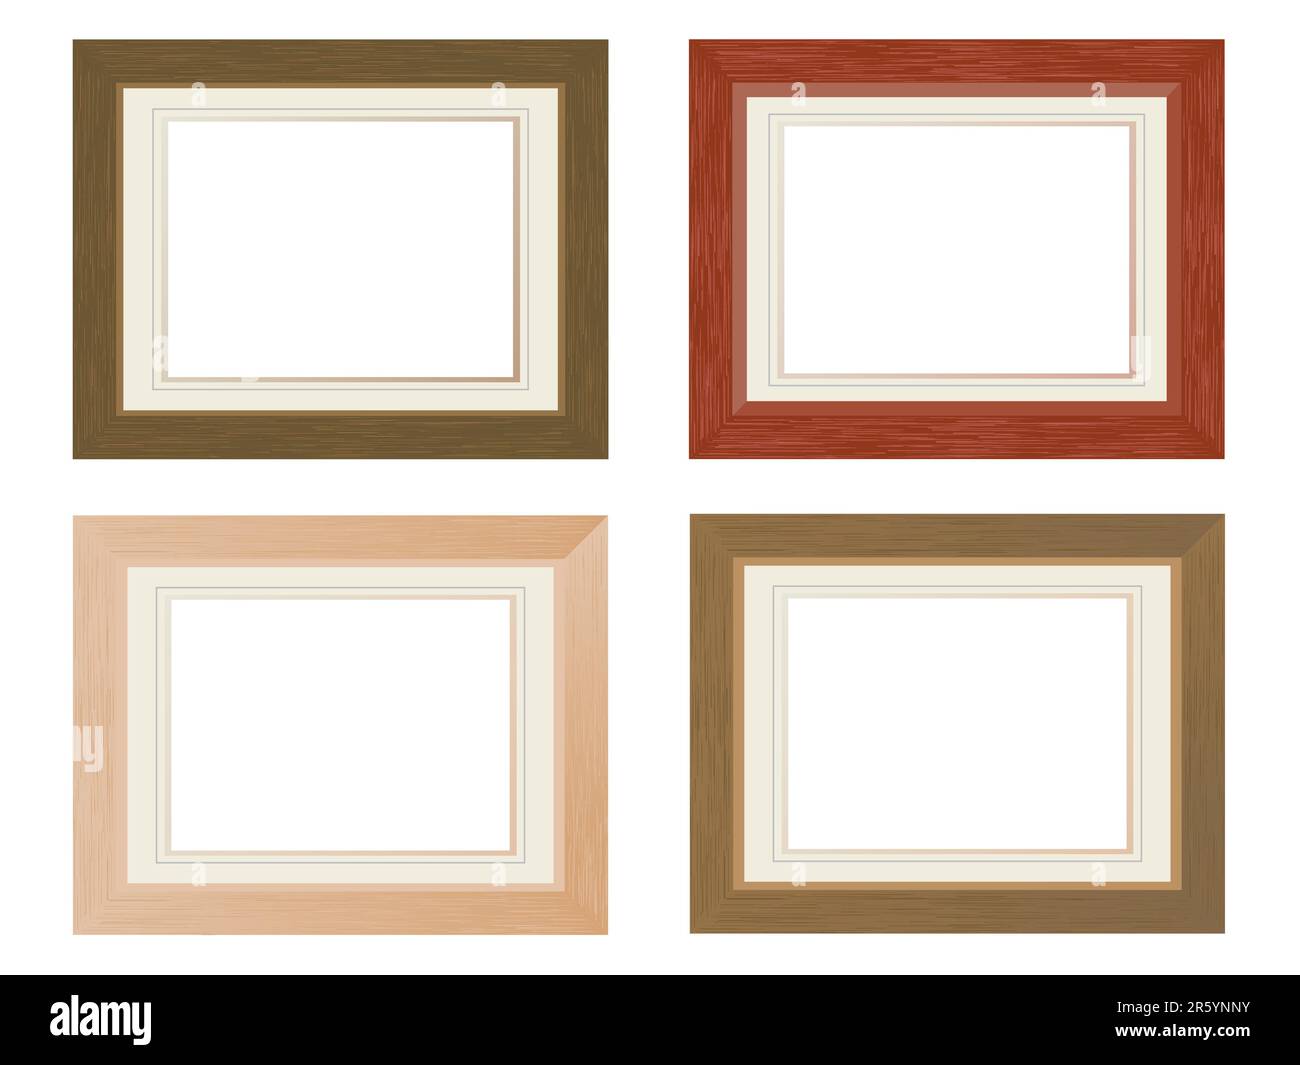 Set of picture frames.  More in my collection. Stock Vector